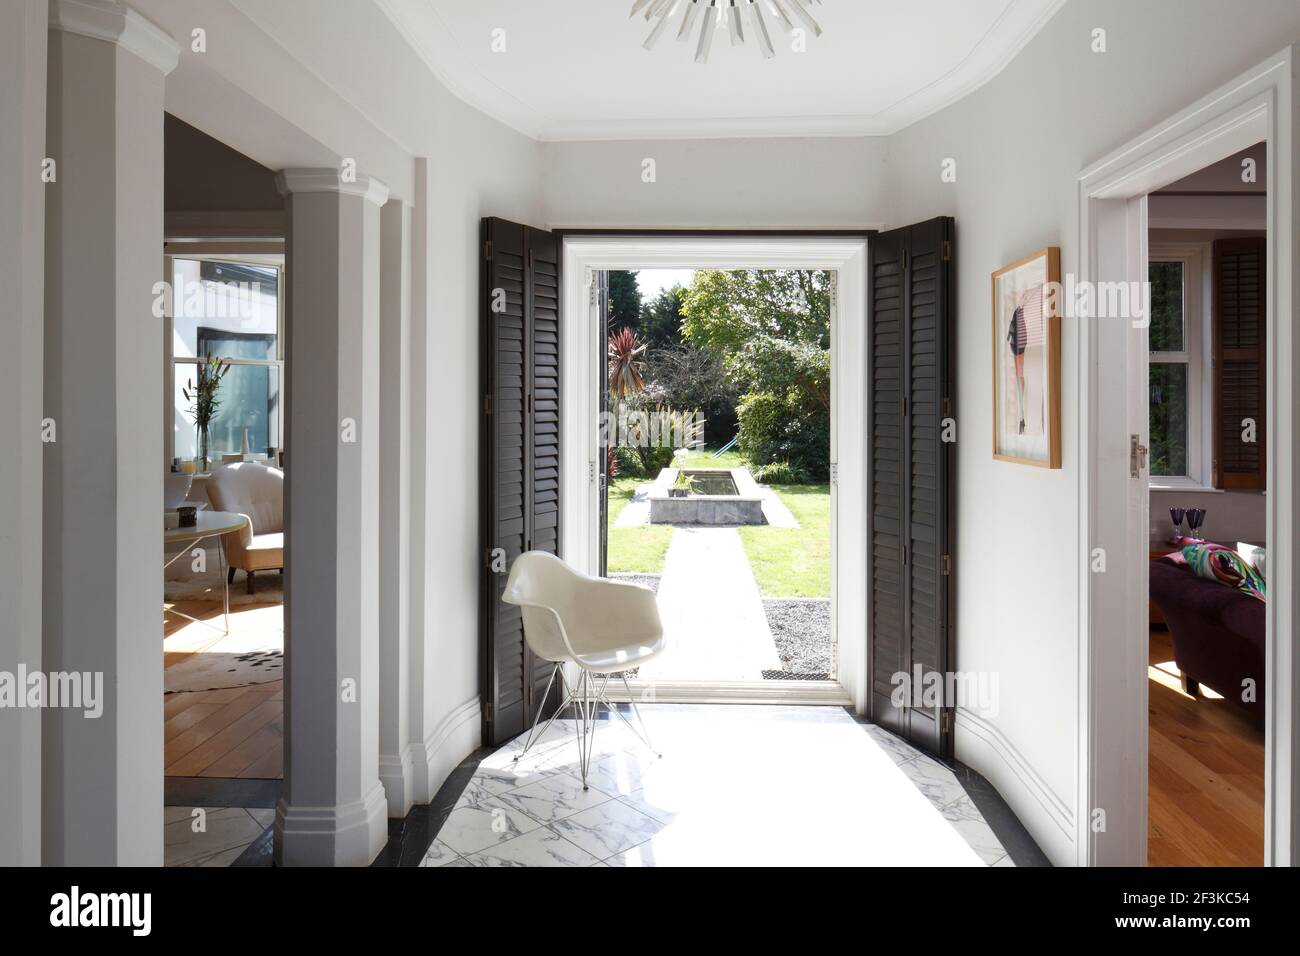 Art Deco hall with views into garden and reception rooms either side | NONE | Stock Photo